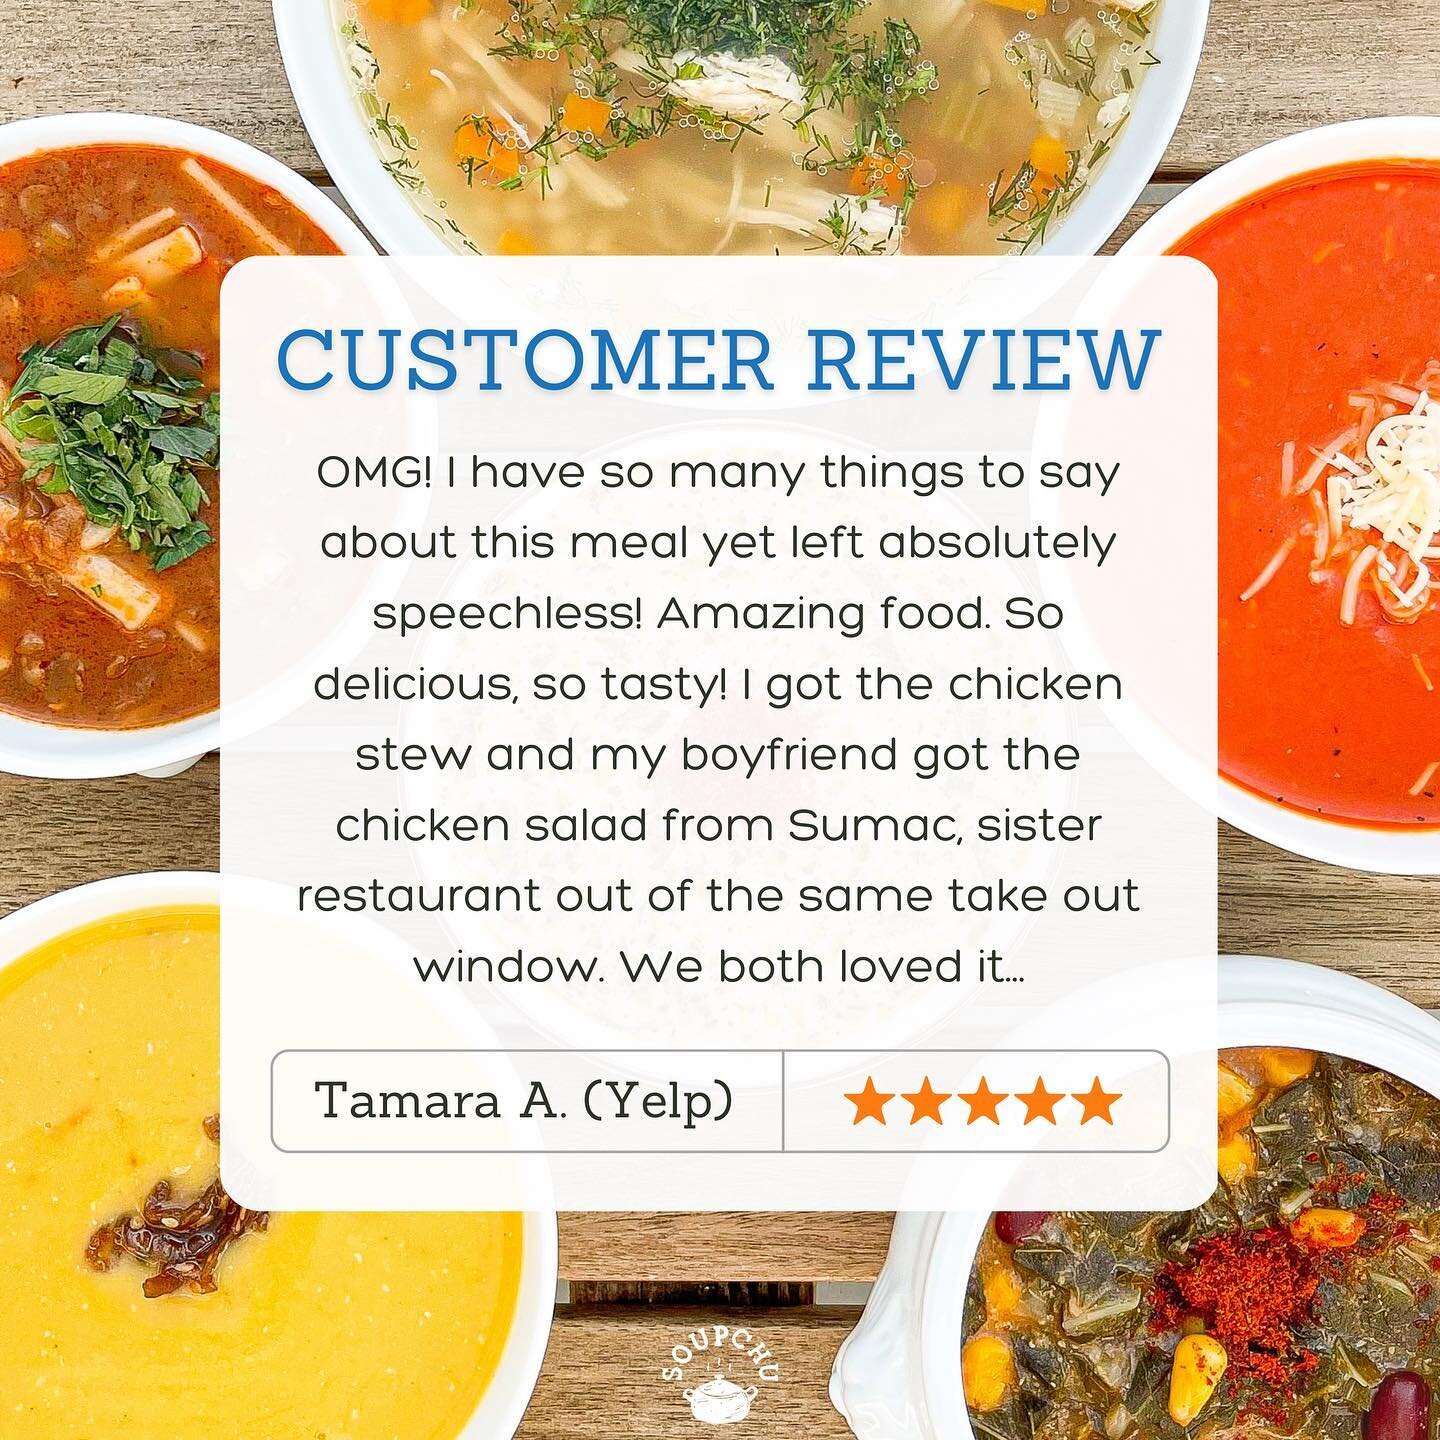 Nothing makes us happier than hearing from smiling customers! 😊🌯 Thank you for the lovely feedbacks on our homemade collection of soups and stews! 

You can also mix &amp; match your favs from our sister restaurants - @sumac.sf @saucy.greens - thro